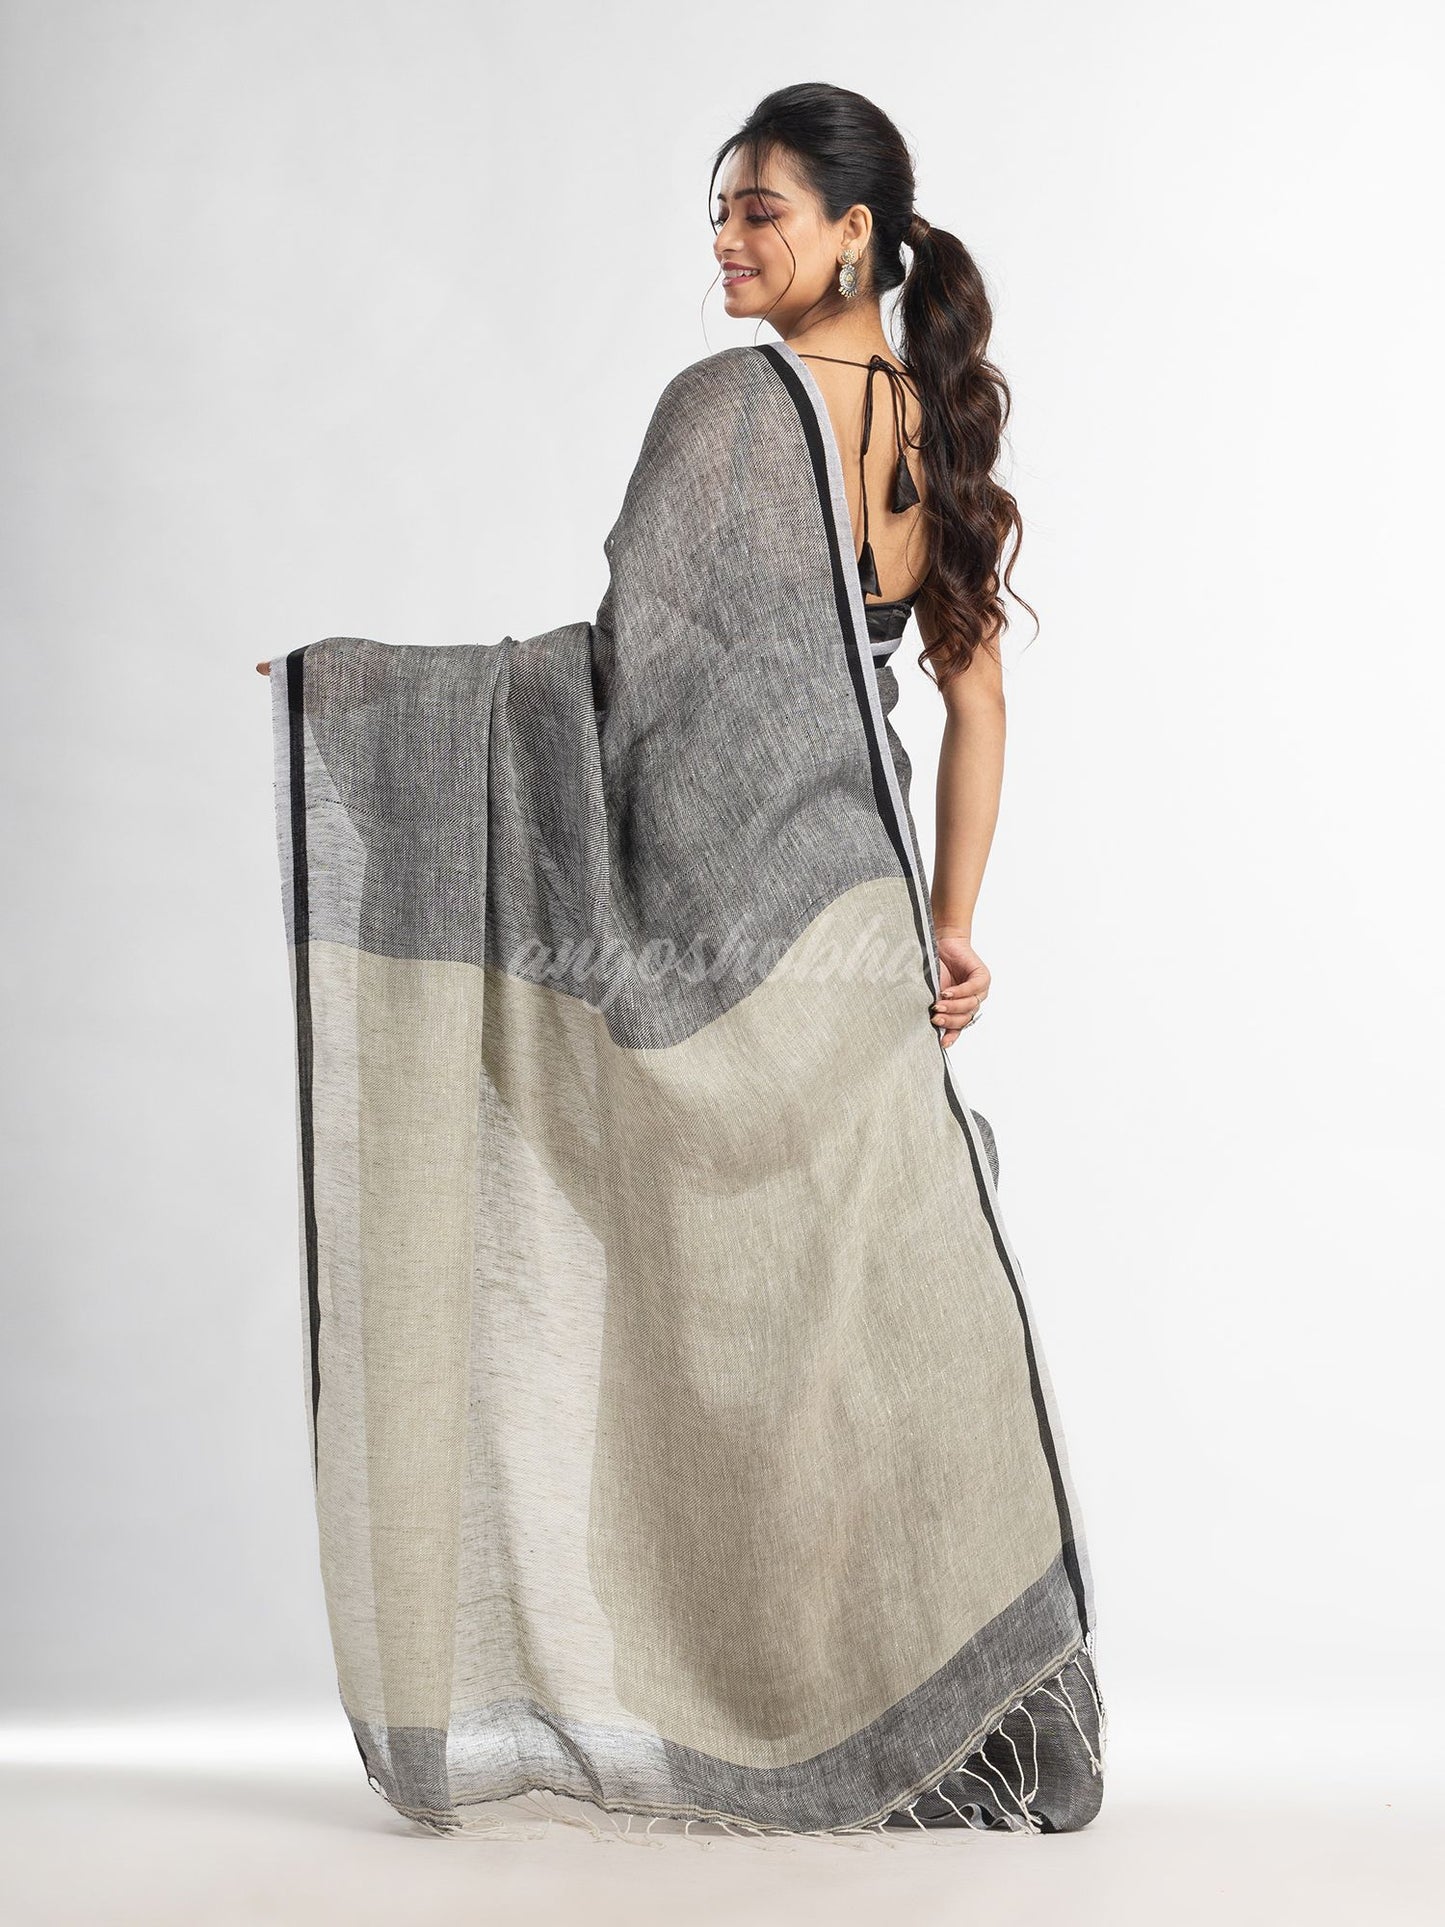 Grey twill weaving with sage green pallu in white and black border handwoven linen saree